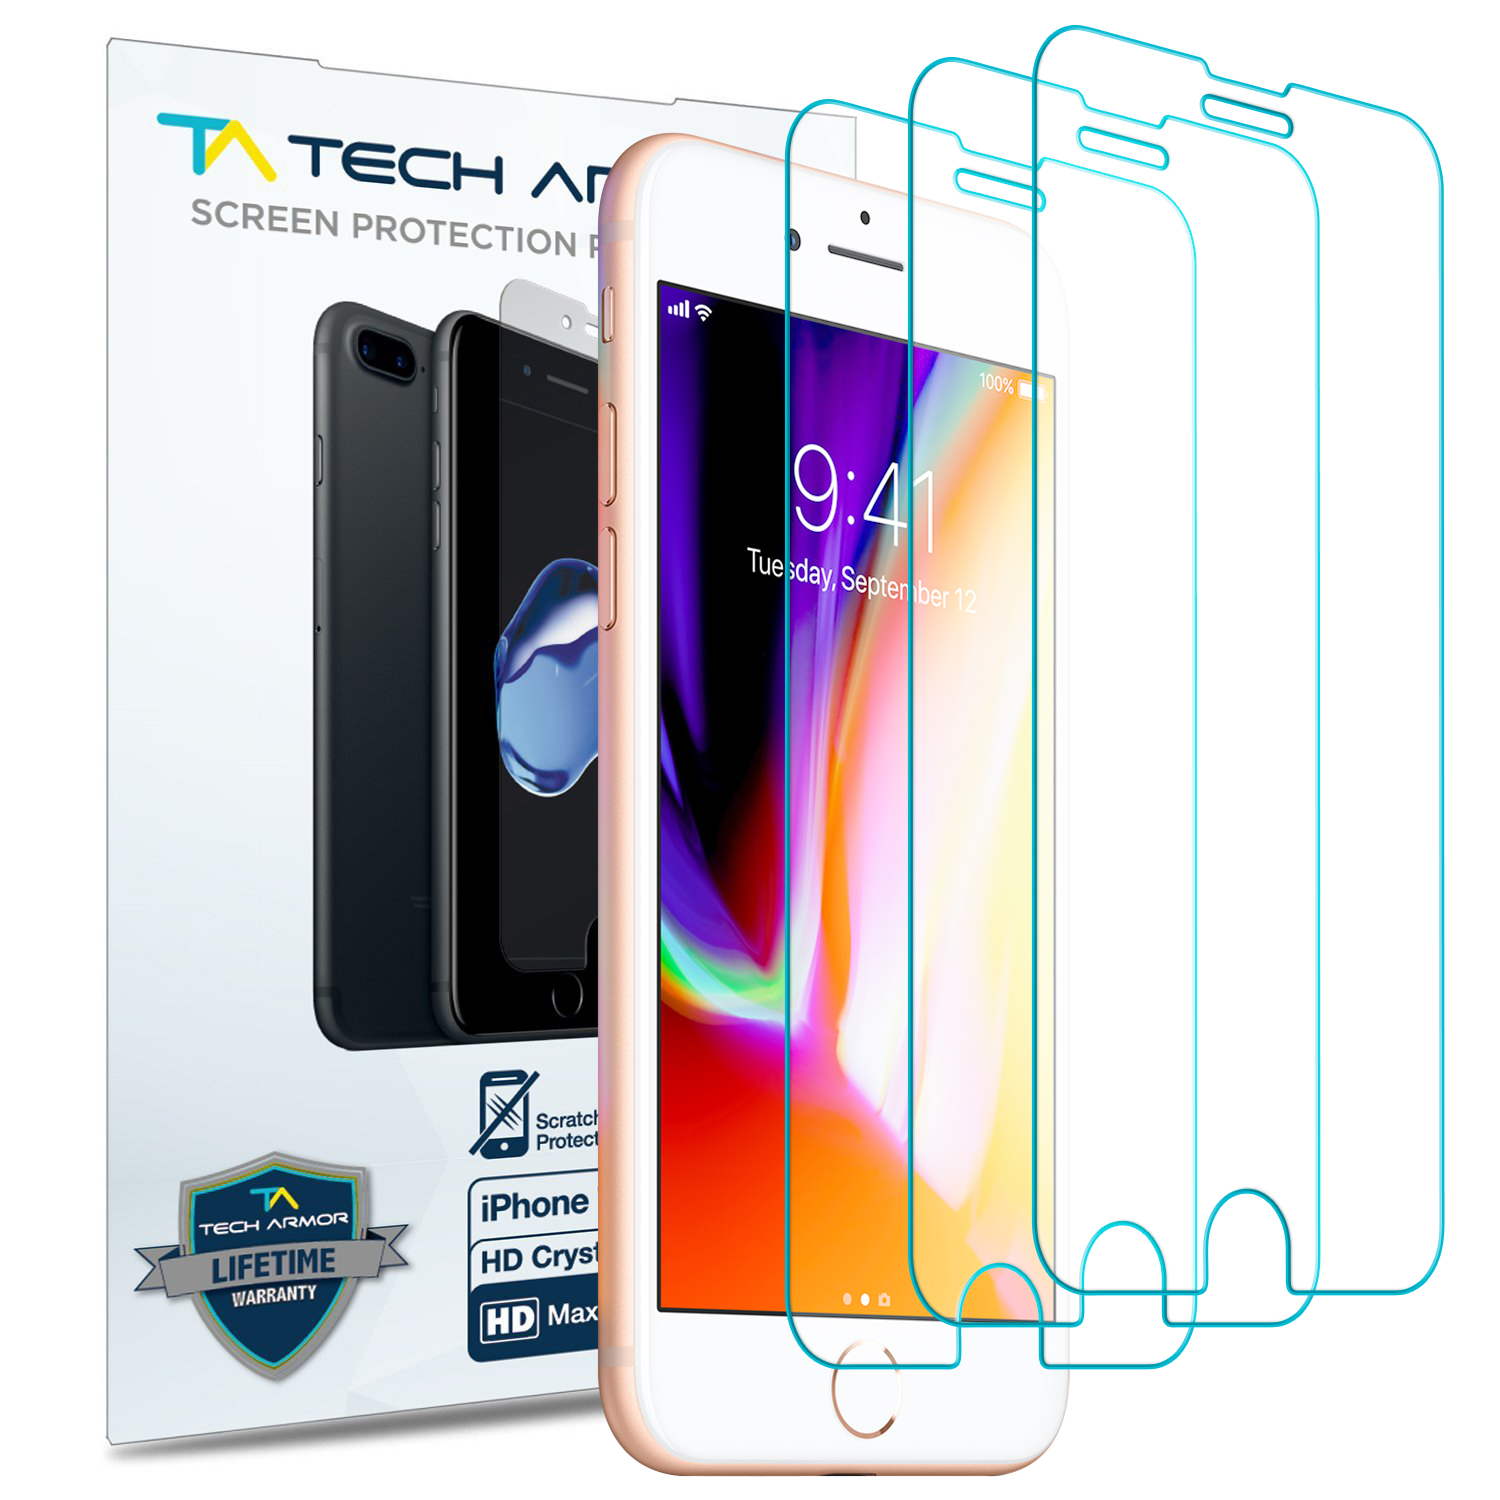 Screen Protector 3-Pack Apple iPhone 7 Plus iPhone 8 Plus Tech Armor HD-Clear Film 5.5 inch